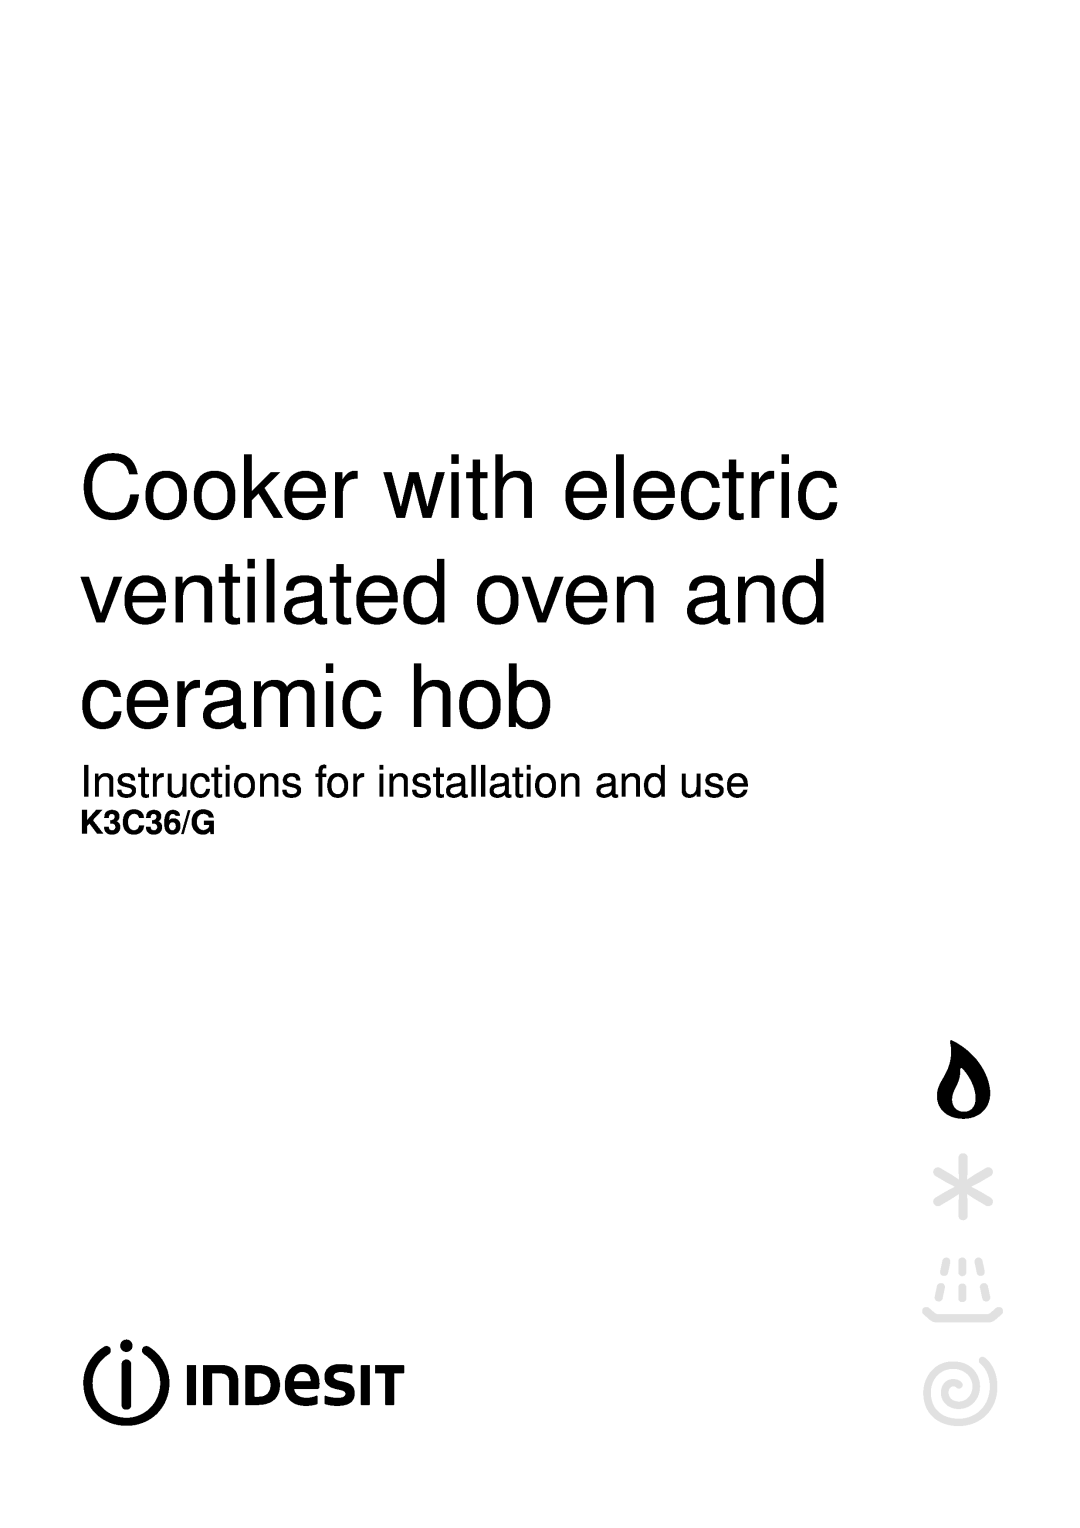 Indesit K3C36/G manual Cooker with electric ventilated oven and ceramic hob, Instructions for installation and use 